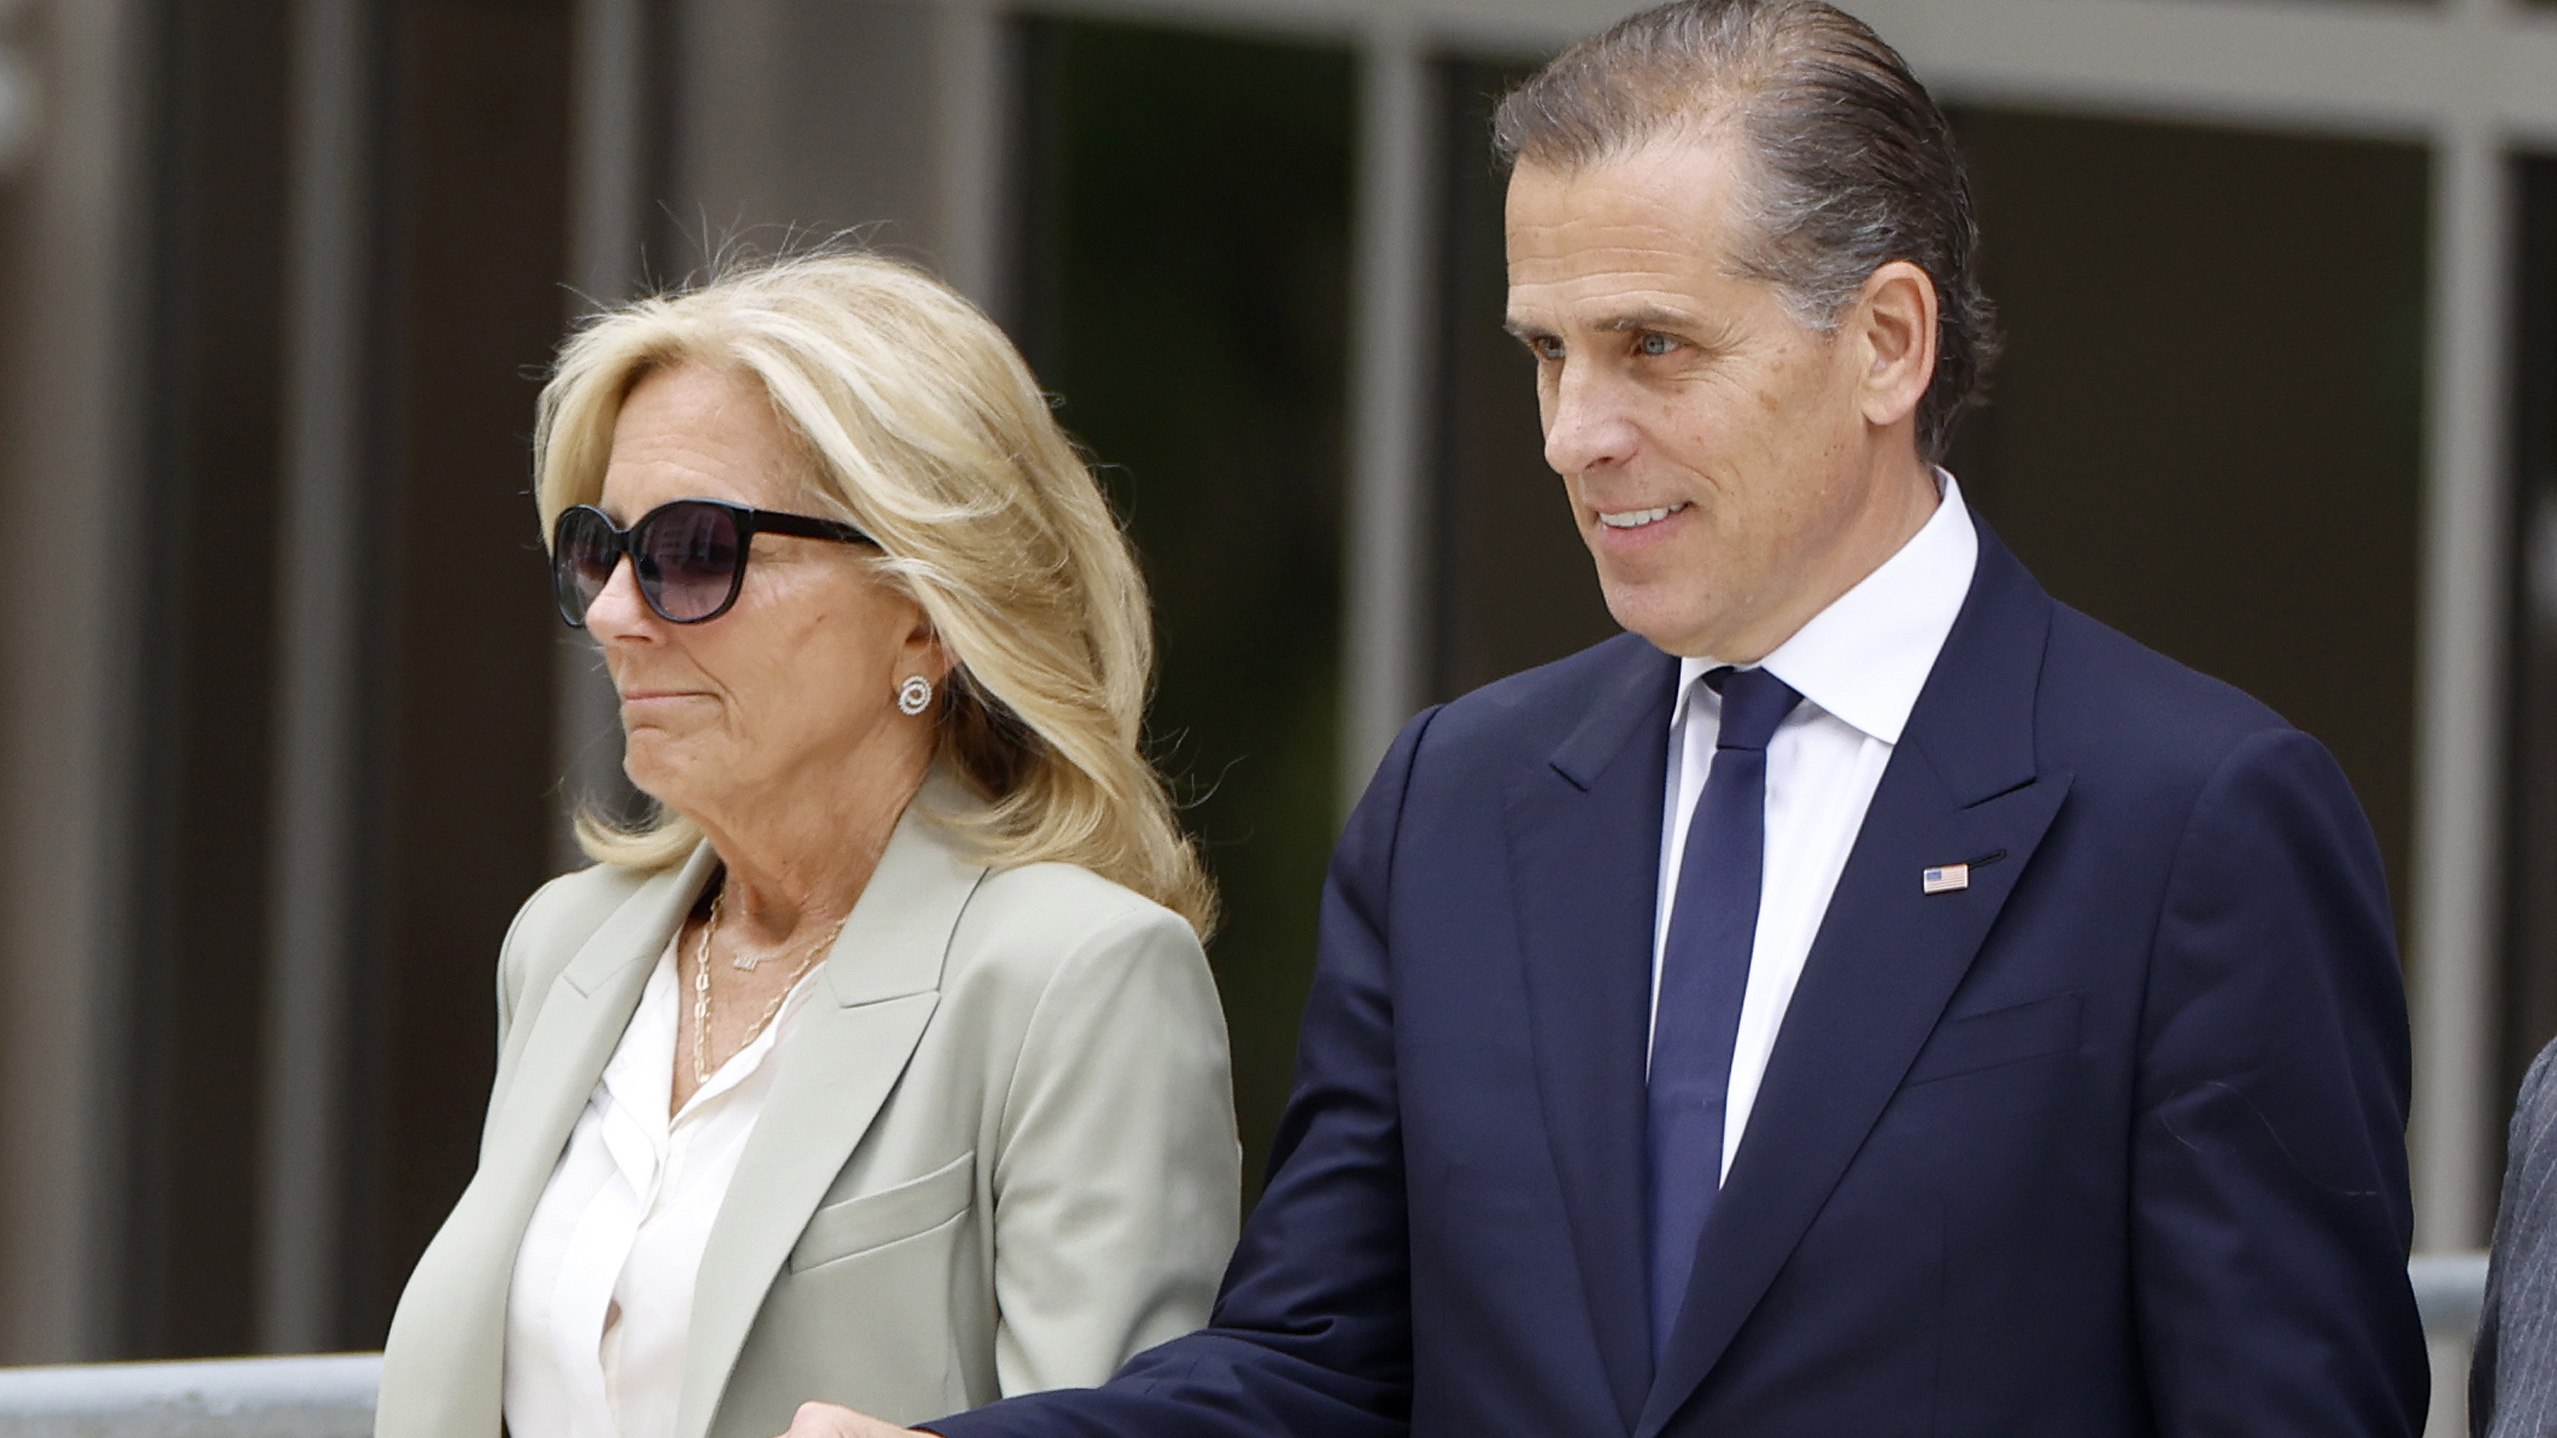 Hunter Biden and his legal team address felony charges